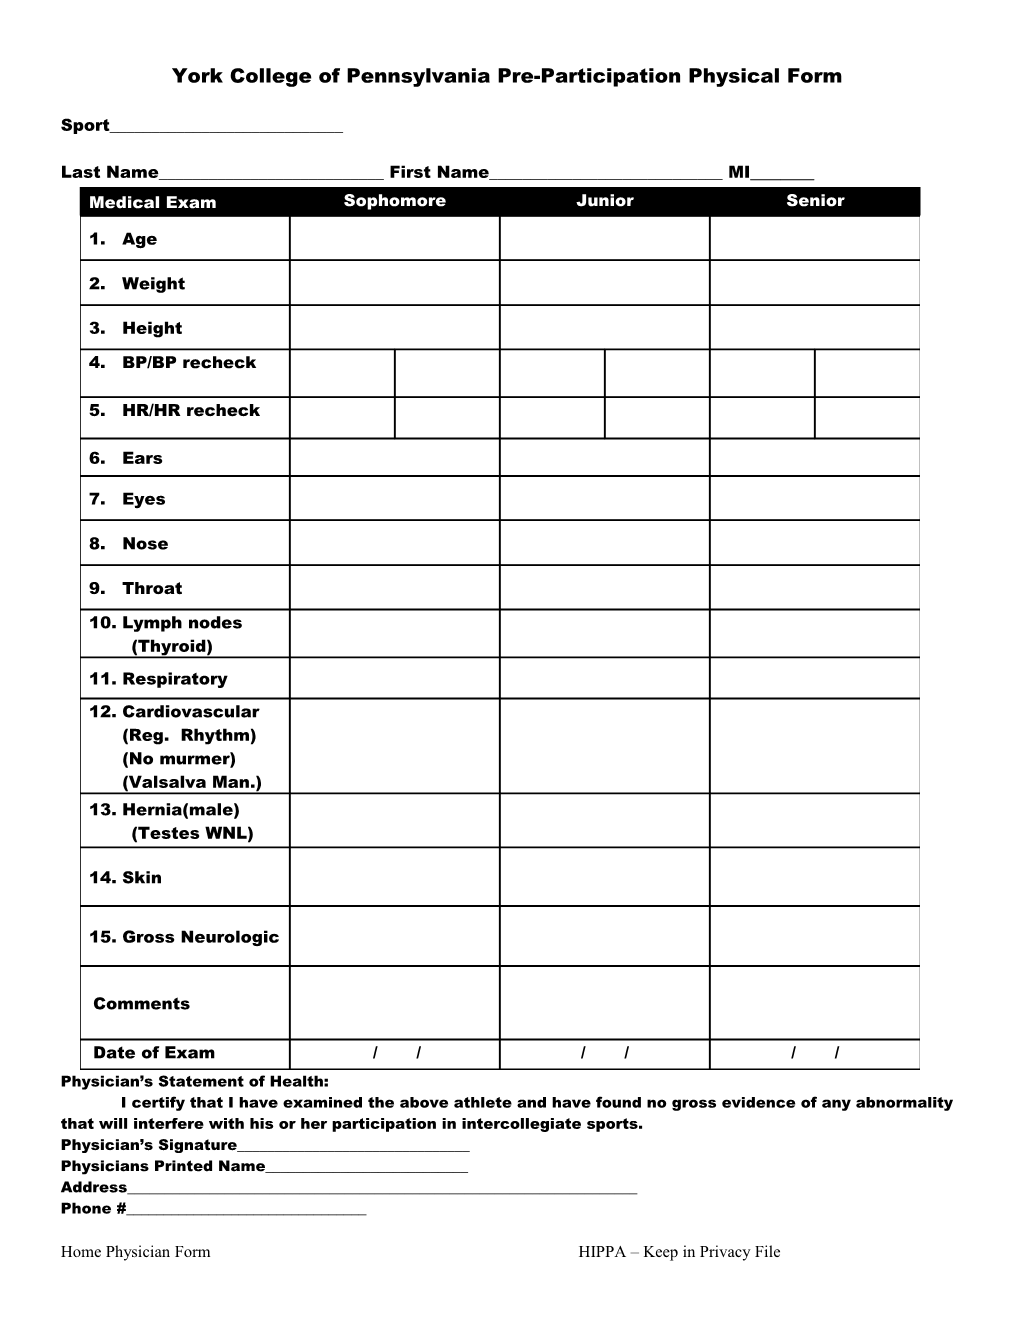 York College of Pennsylvania Pre-Participation Physical Form